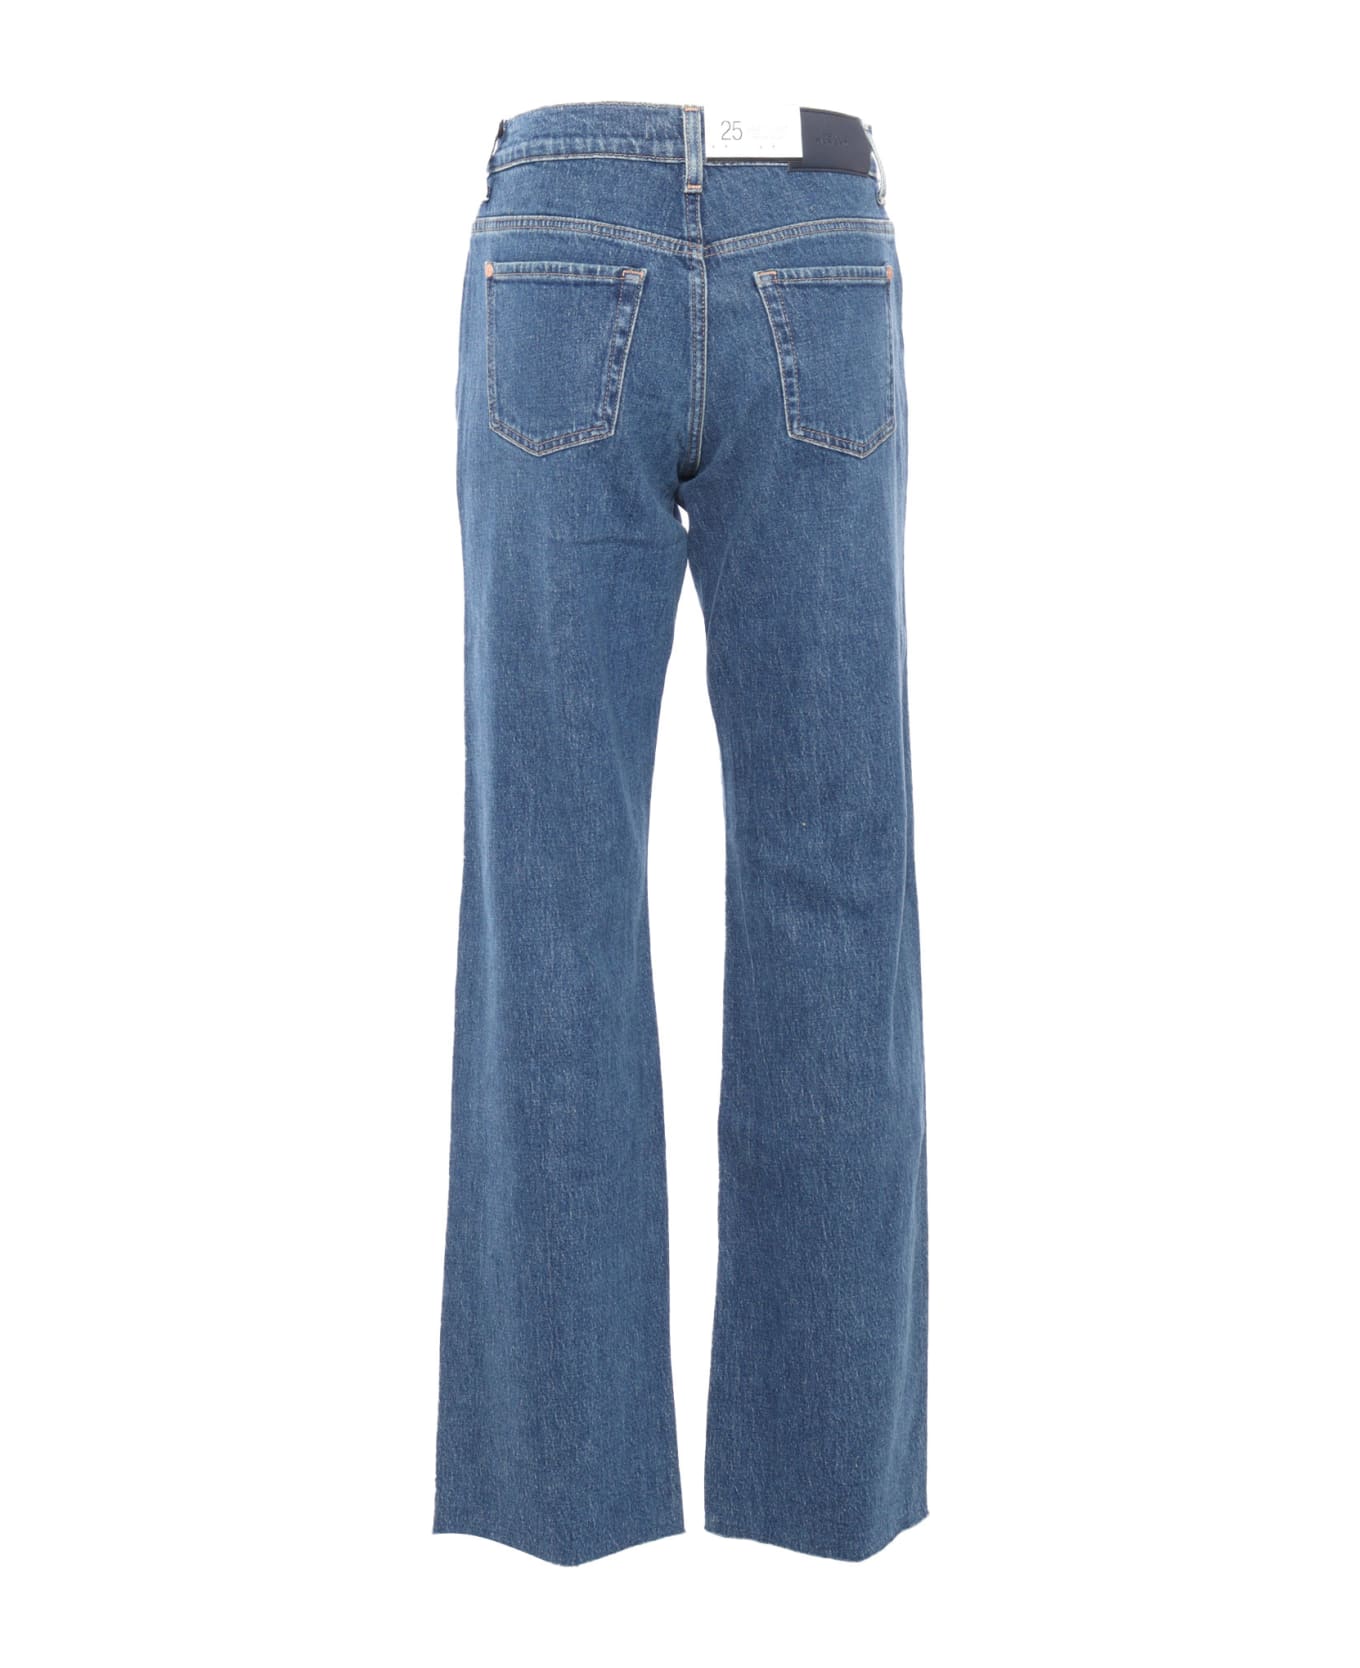 7 For All Mankind Women's Flared Leg Jeans - BLUE